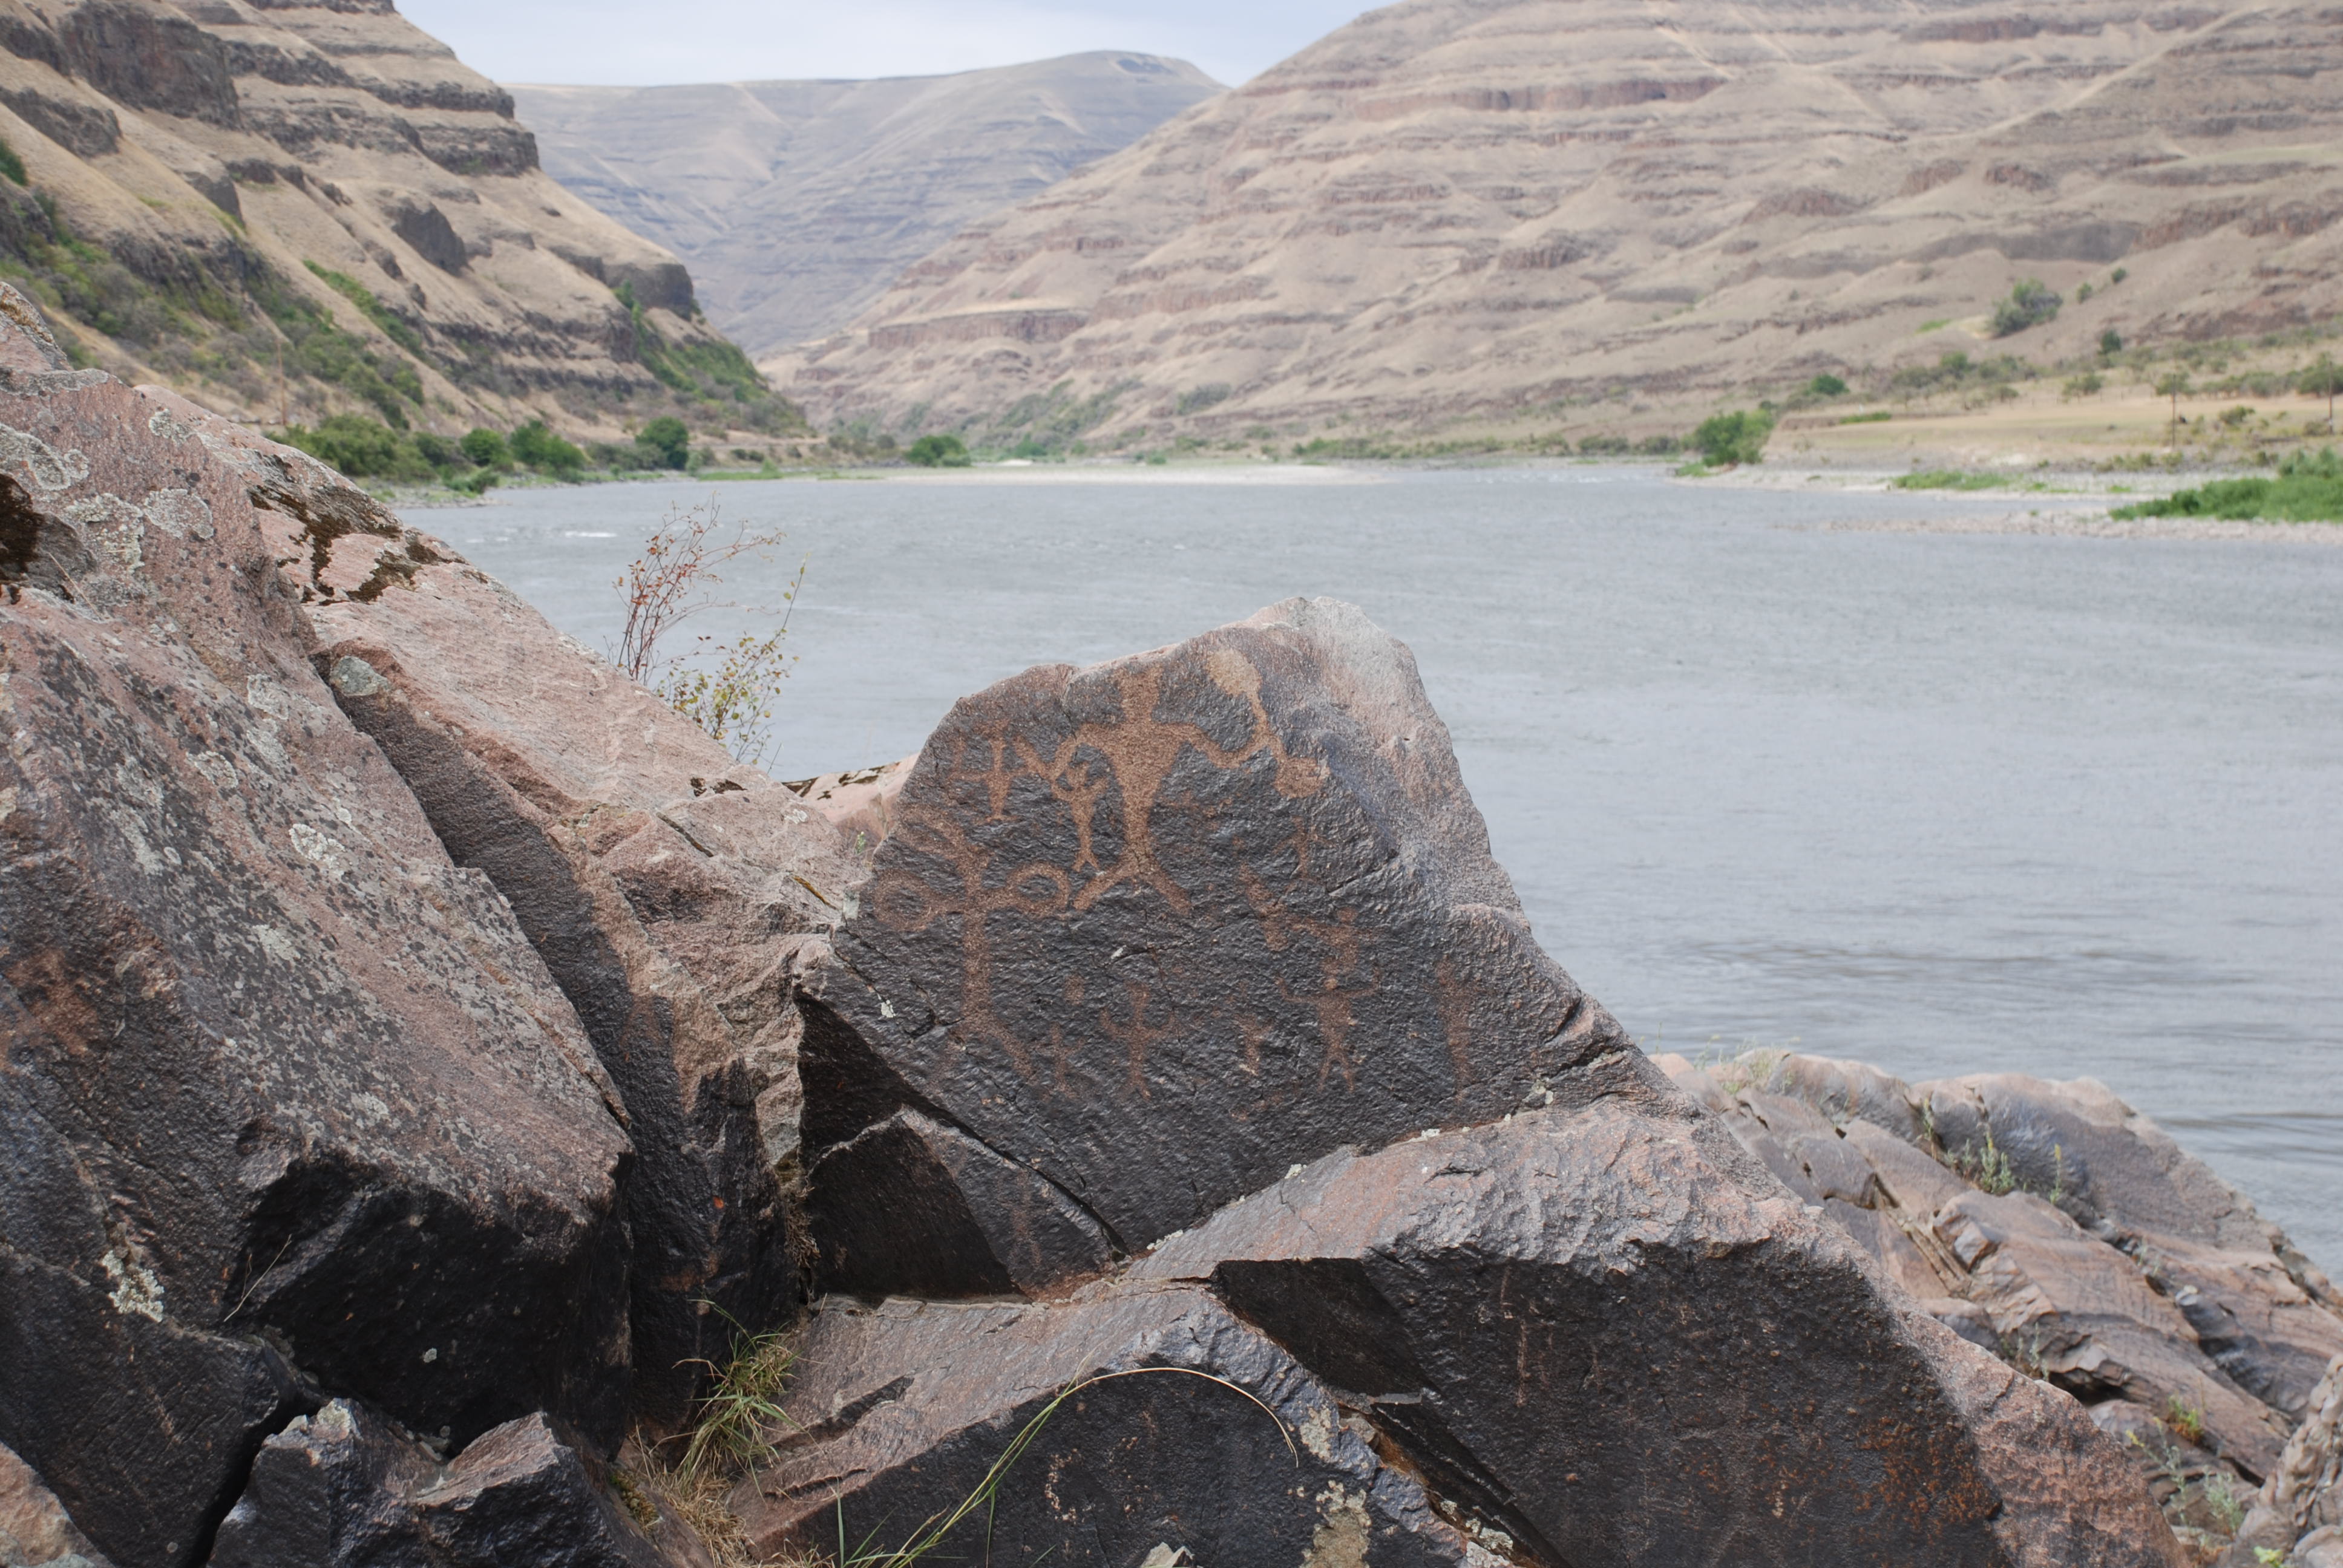 Petroglyph carvings on the bank of the Snake River.